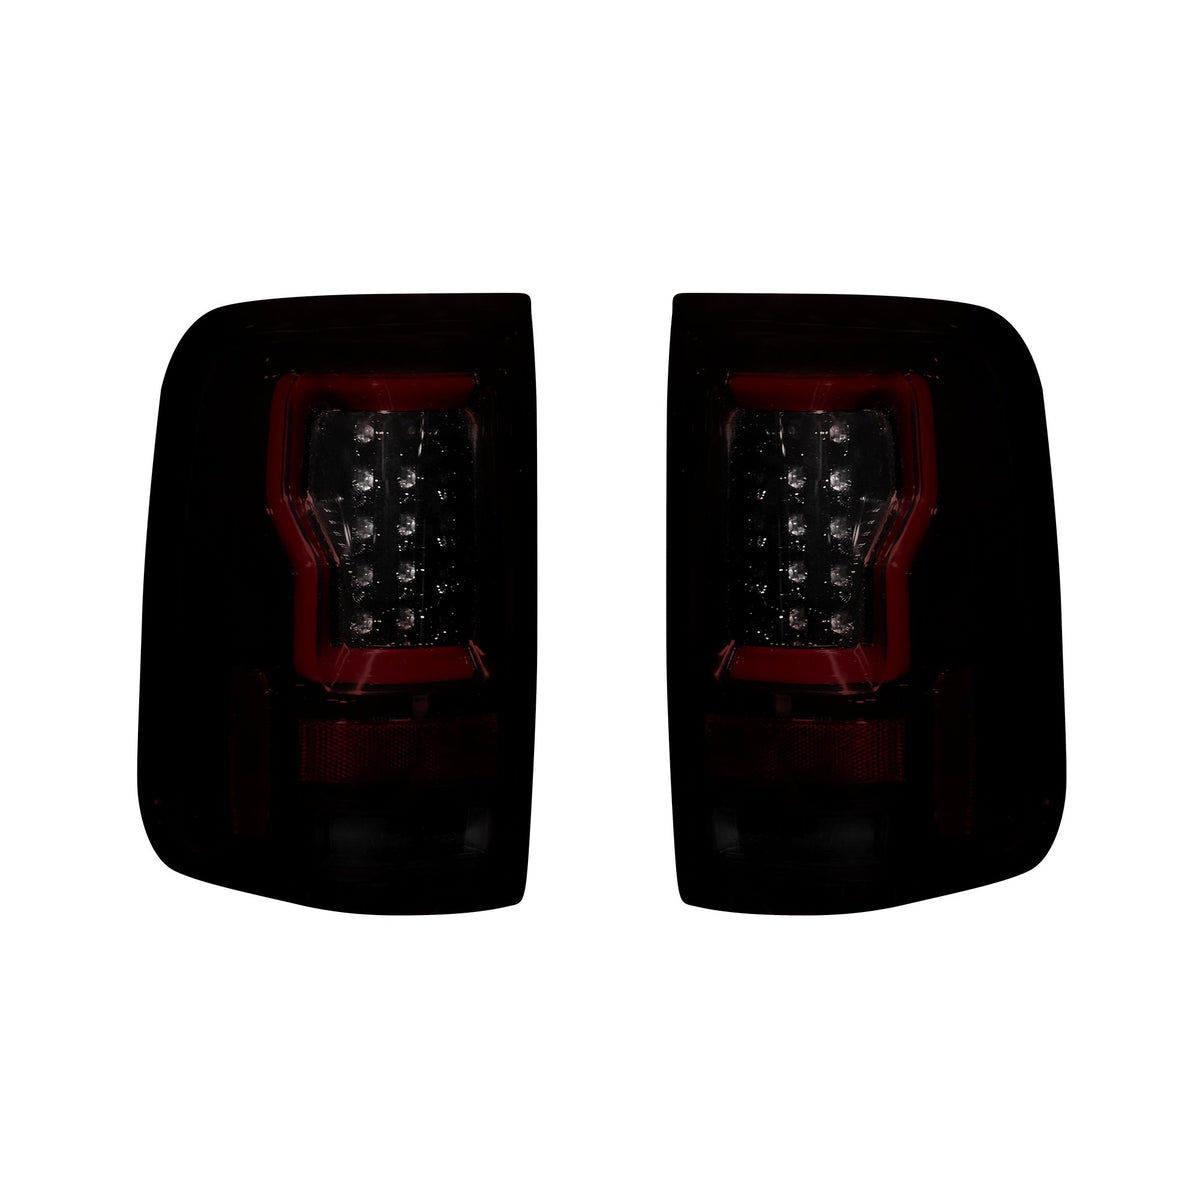 Ford F150 04-08 Straight aka "Style" Side OLED TAIL LIGHTS - Red LensFord F150 04-08 Straight aka "Style" Side OLED TAIL LIGHTS - Red Lens